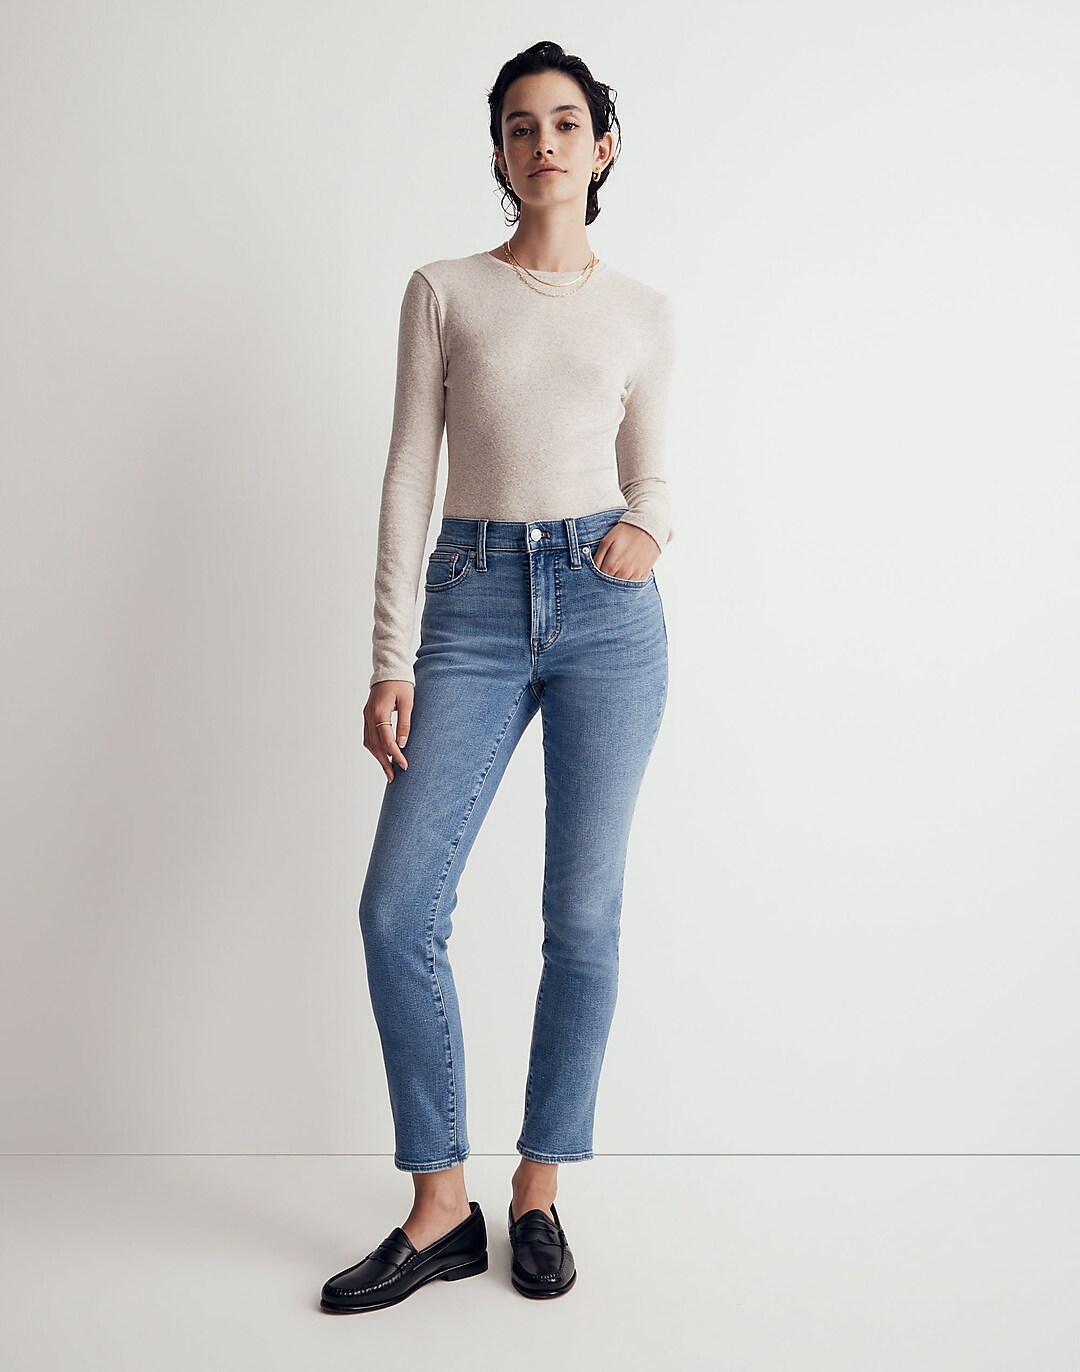 The Mid-Rise Perfect Vintage Jean in Clearwater Wash